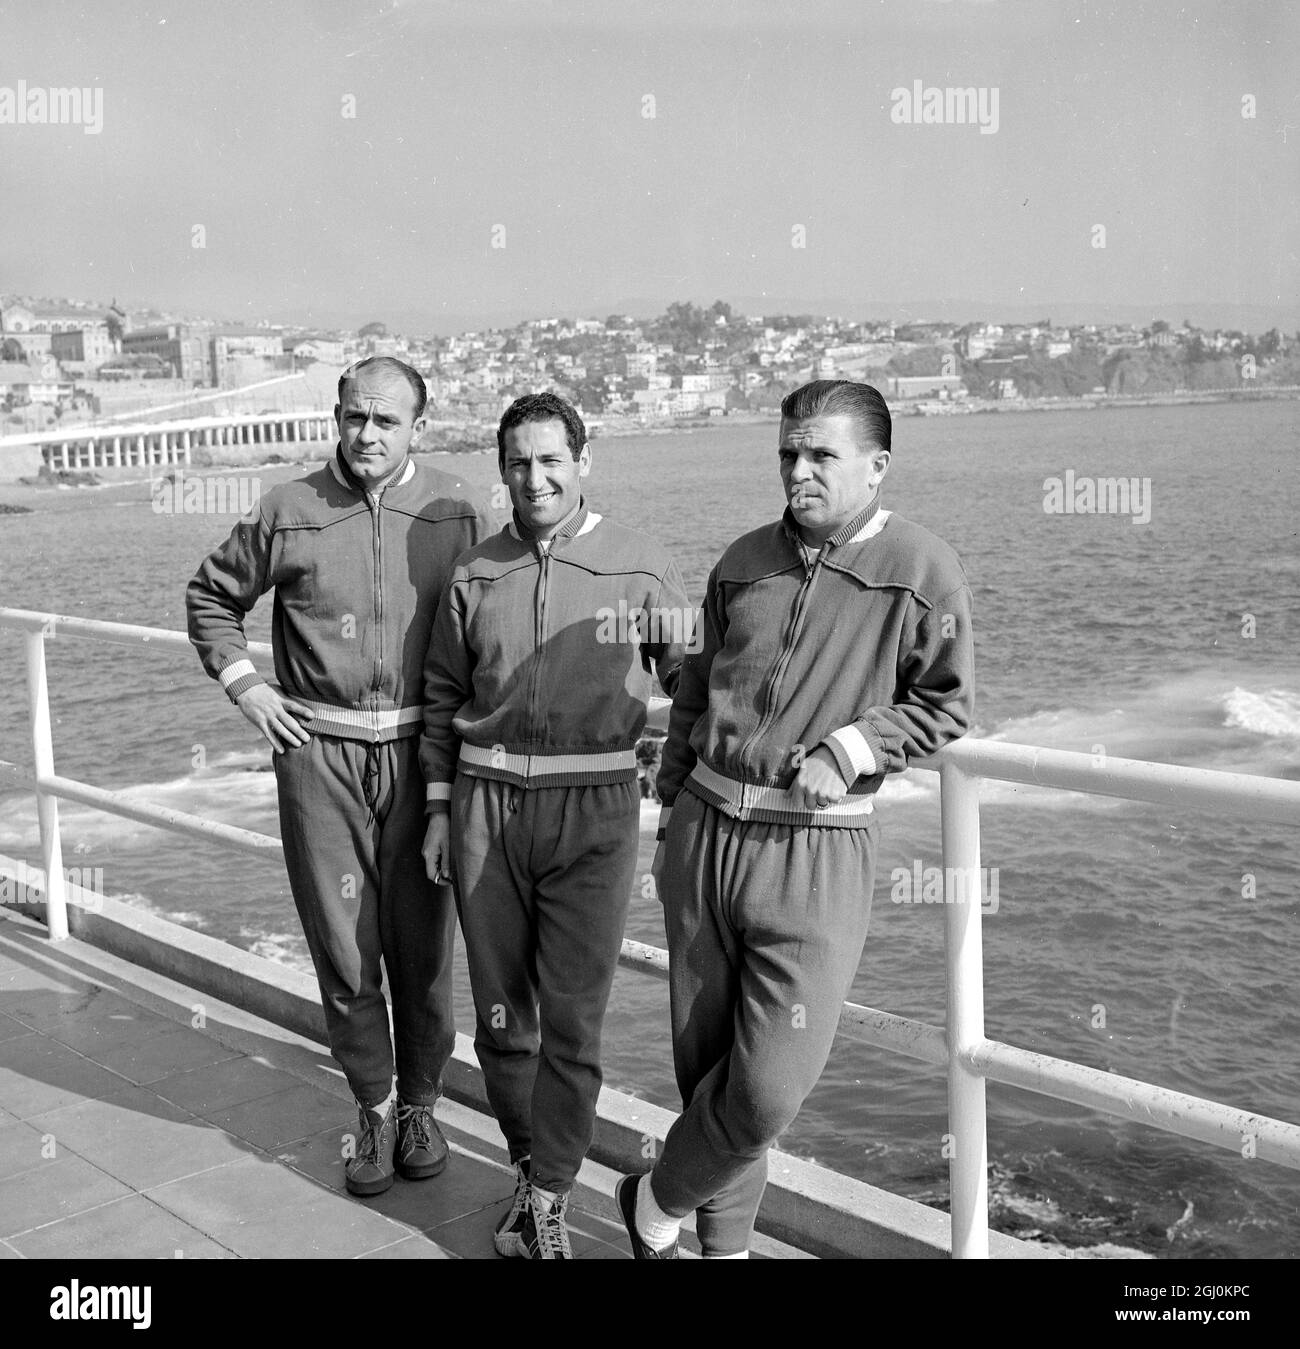 Vina Del Mar, Chile: Three of the principal footballers in European soccer today sun themselves on the promenade at Vina Bell Mar, Chile. Left to right, they are Alfredo Di Stefano; Francisco Gento, and Ferenc Puskas, all members of the Spanish National Football Team now in training for the opeening of the World Cup Soccer Tournament. 27 May 1962 Stock Photo